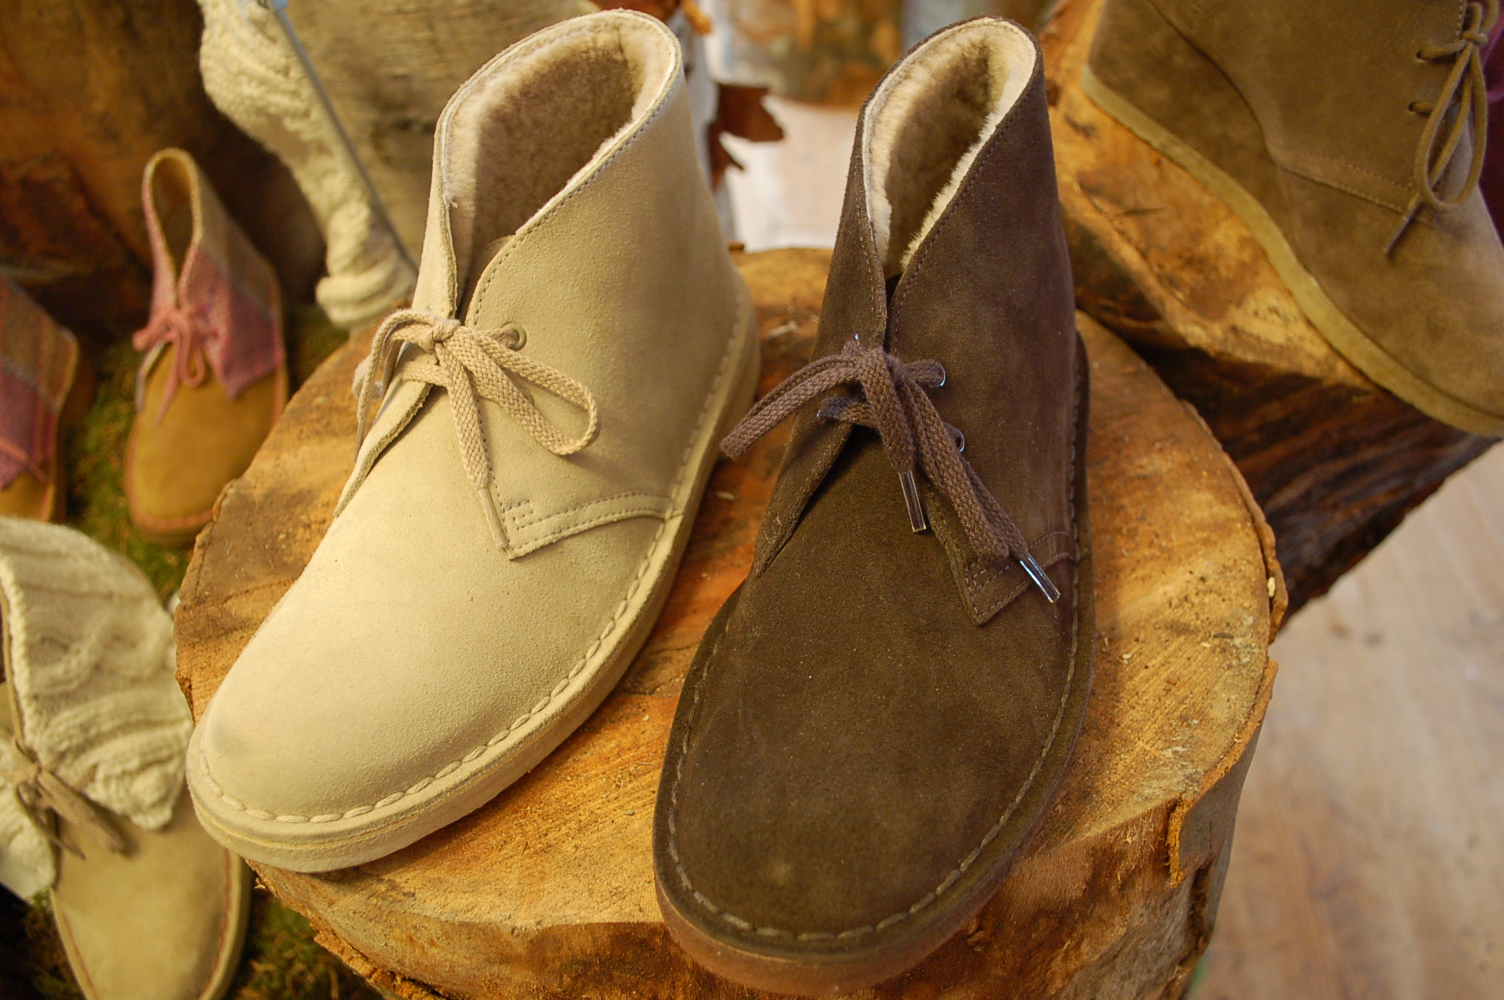 leather clarks desert boots in snow